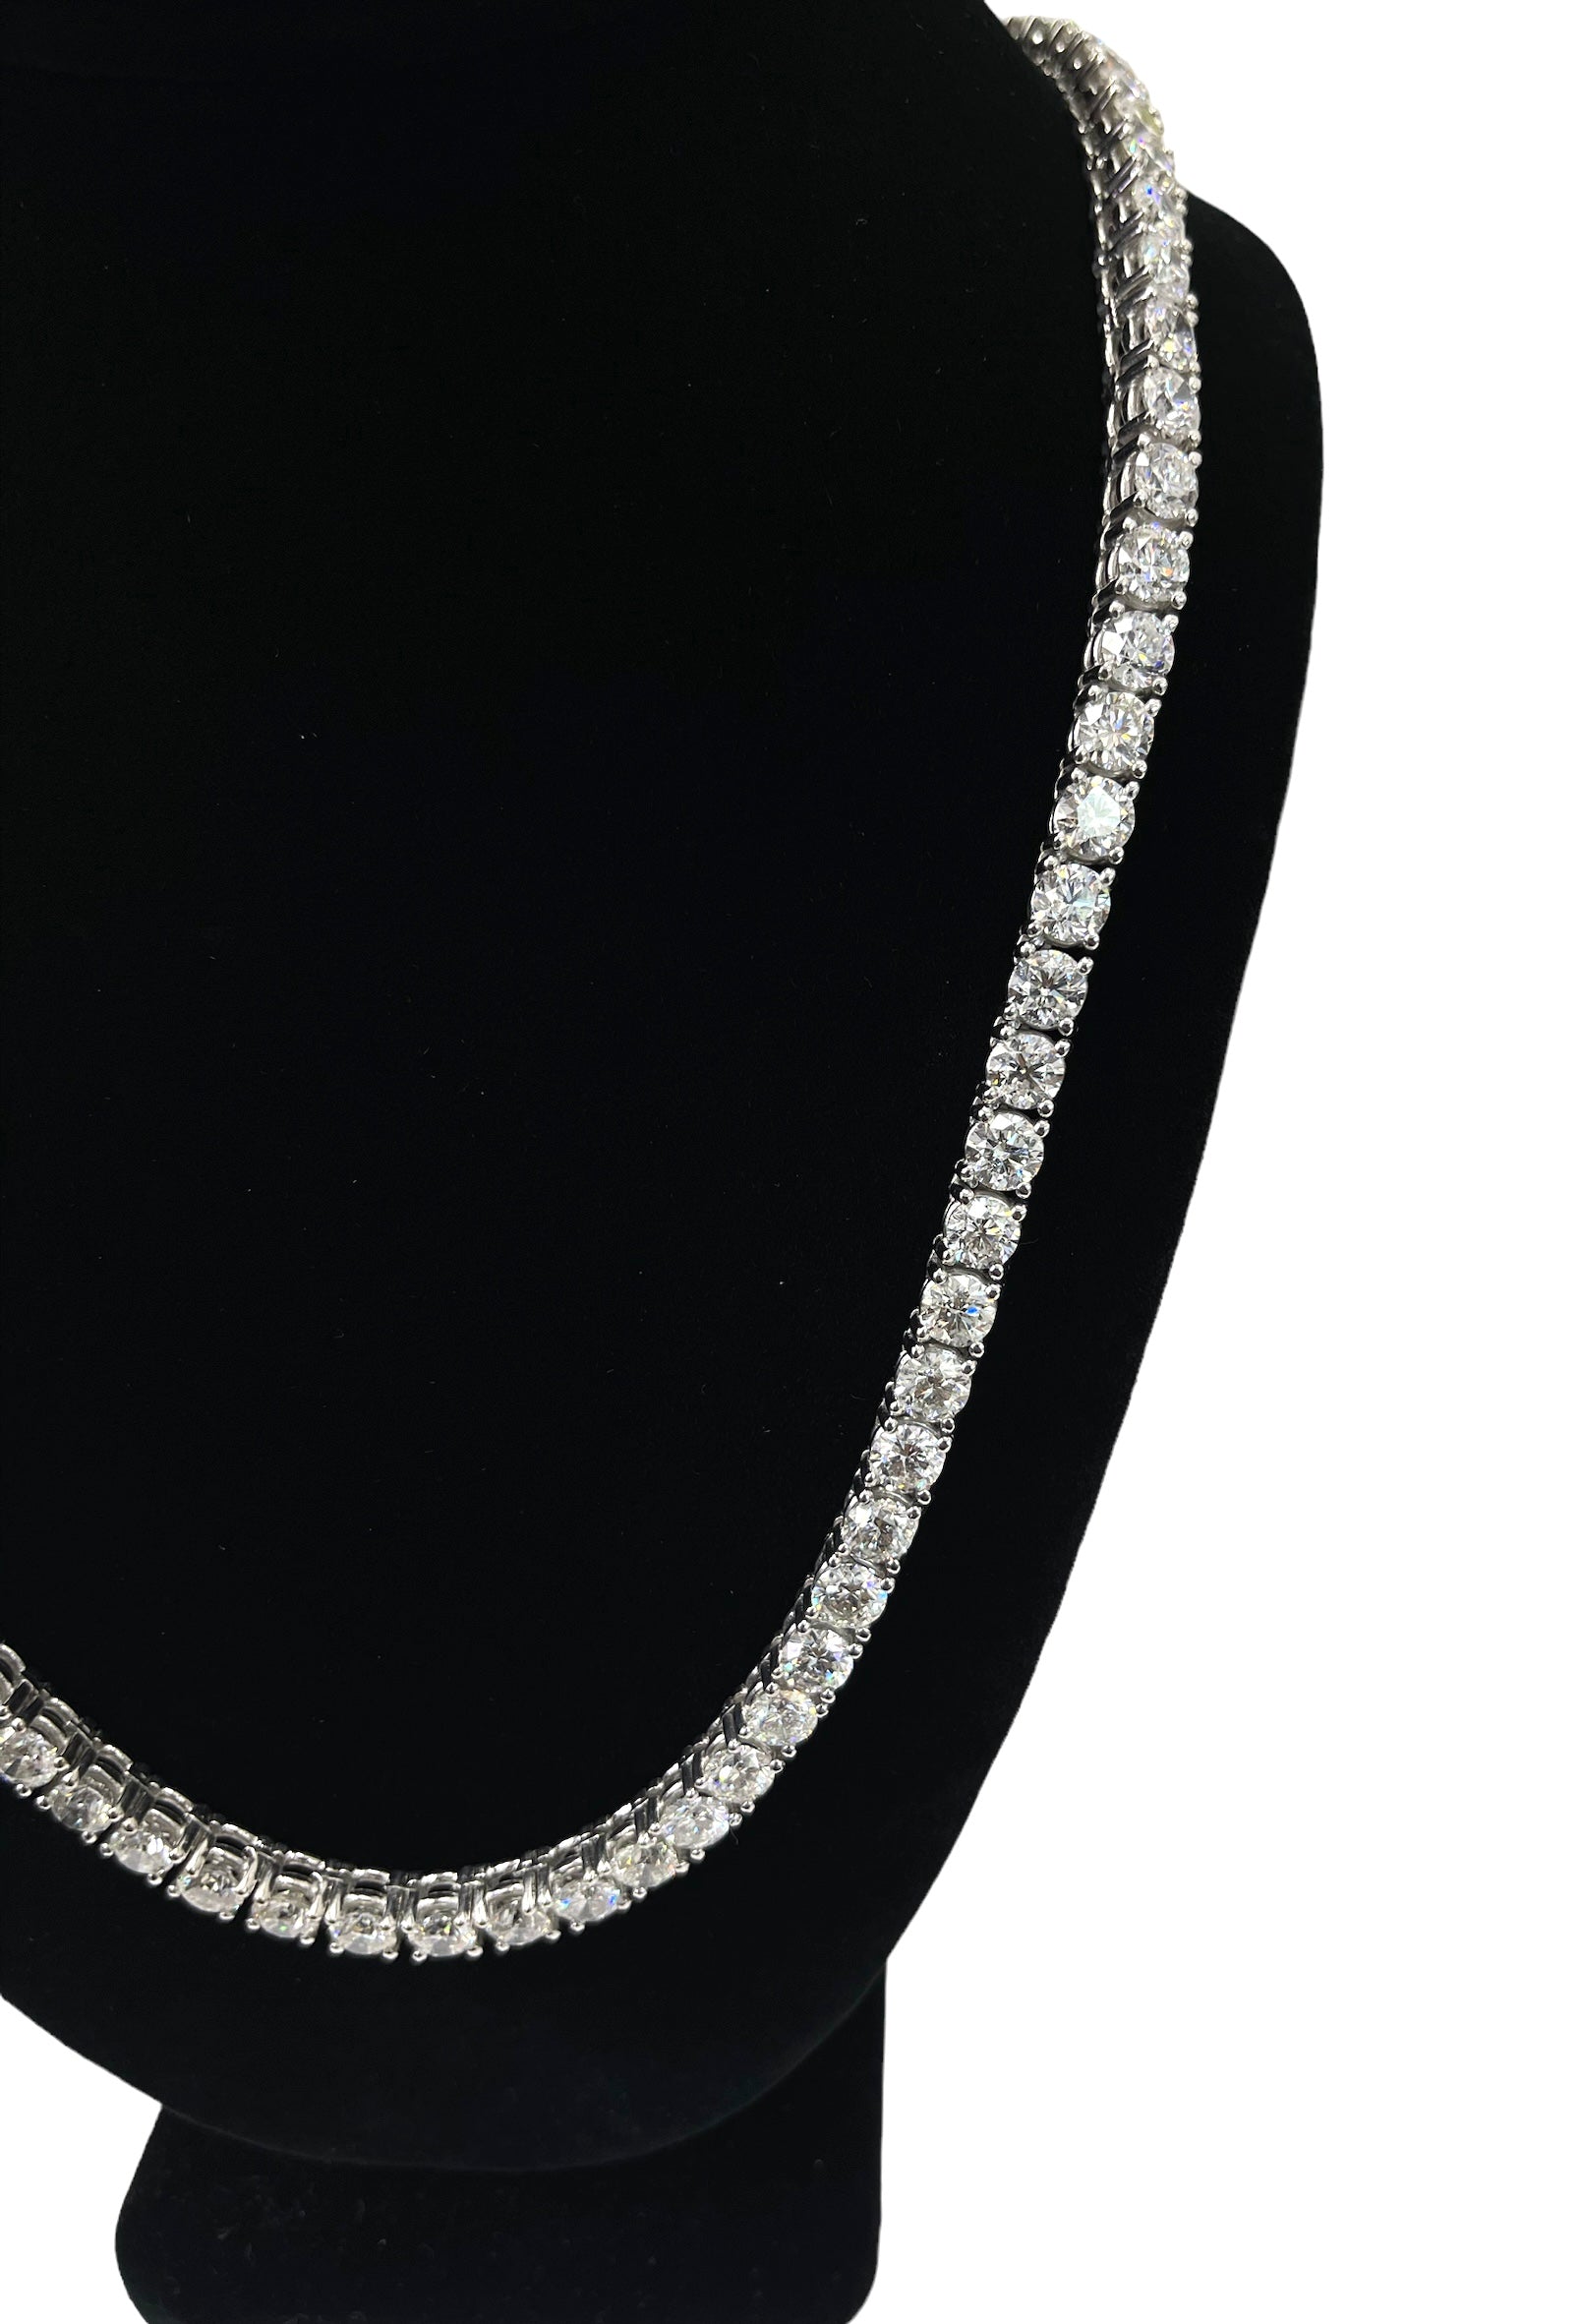 Round Brilliant Tennis Chain Necklace 65.32 Carats White Gold 14kt